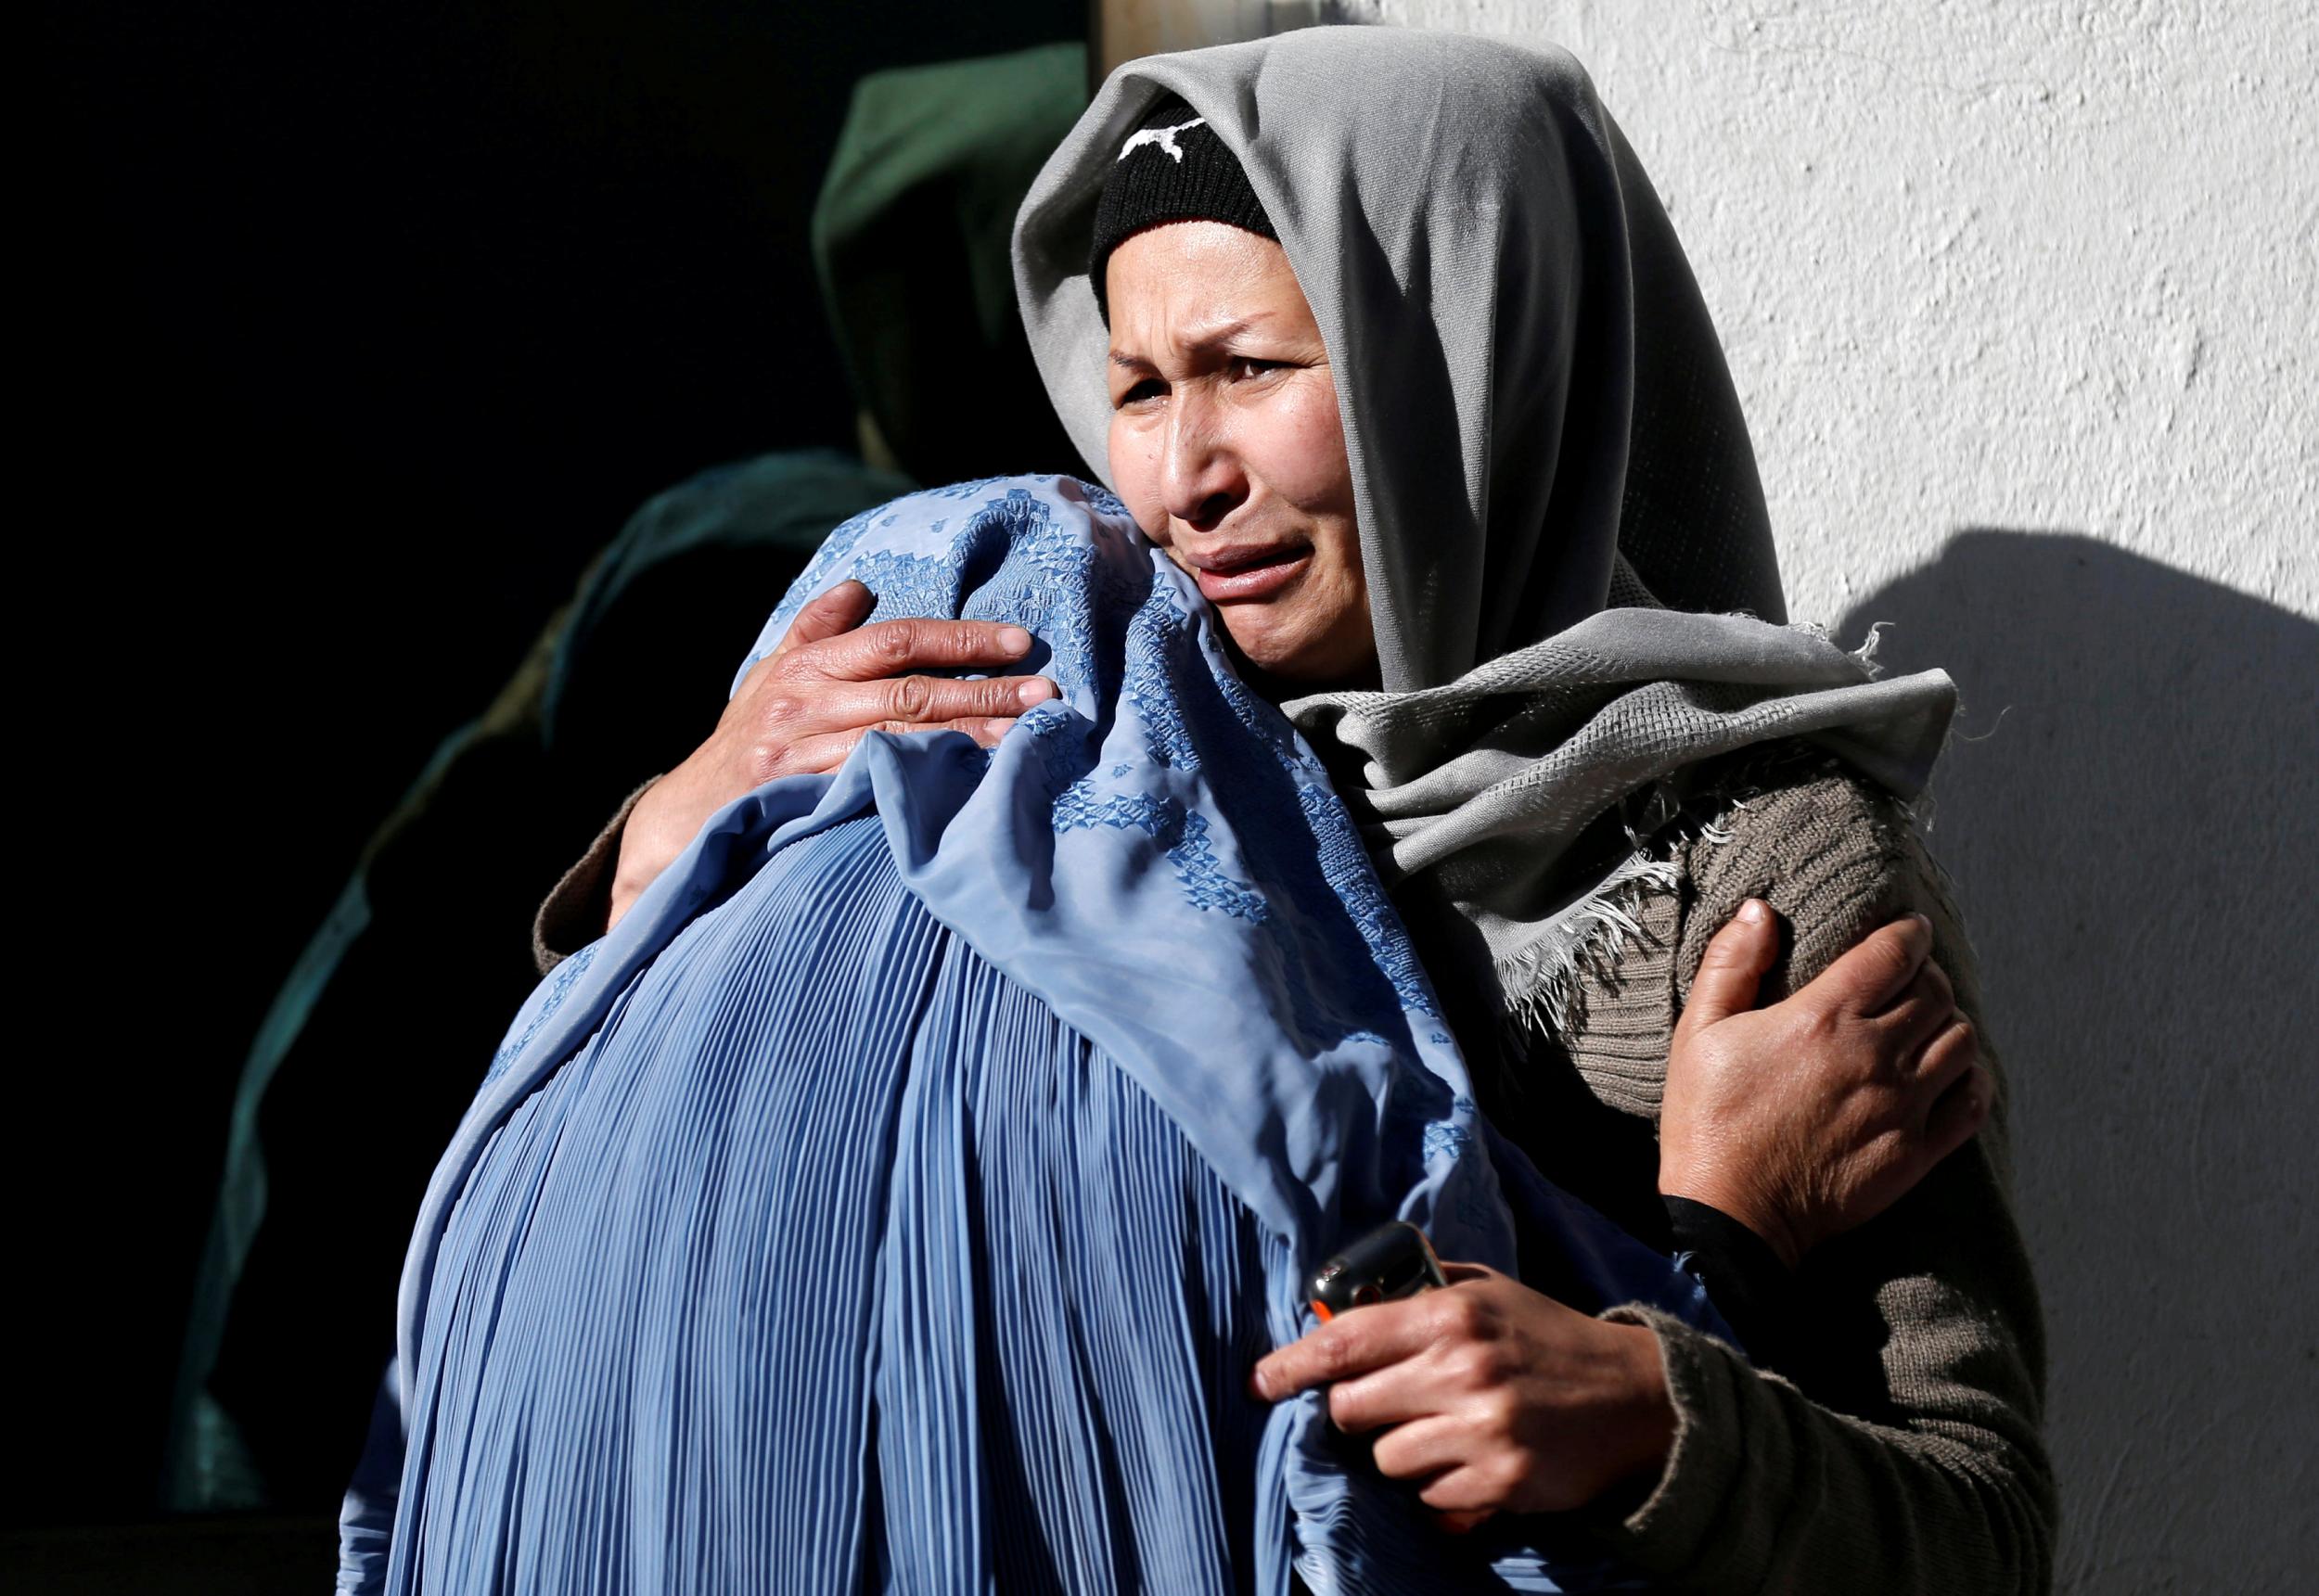 Afghan women mourn inside a hospital compound after a suicide attack in Kabul